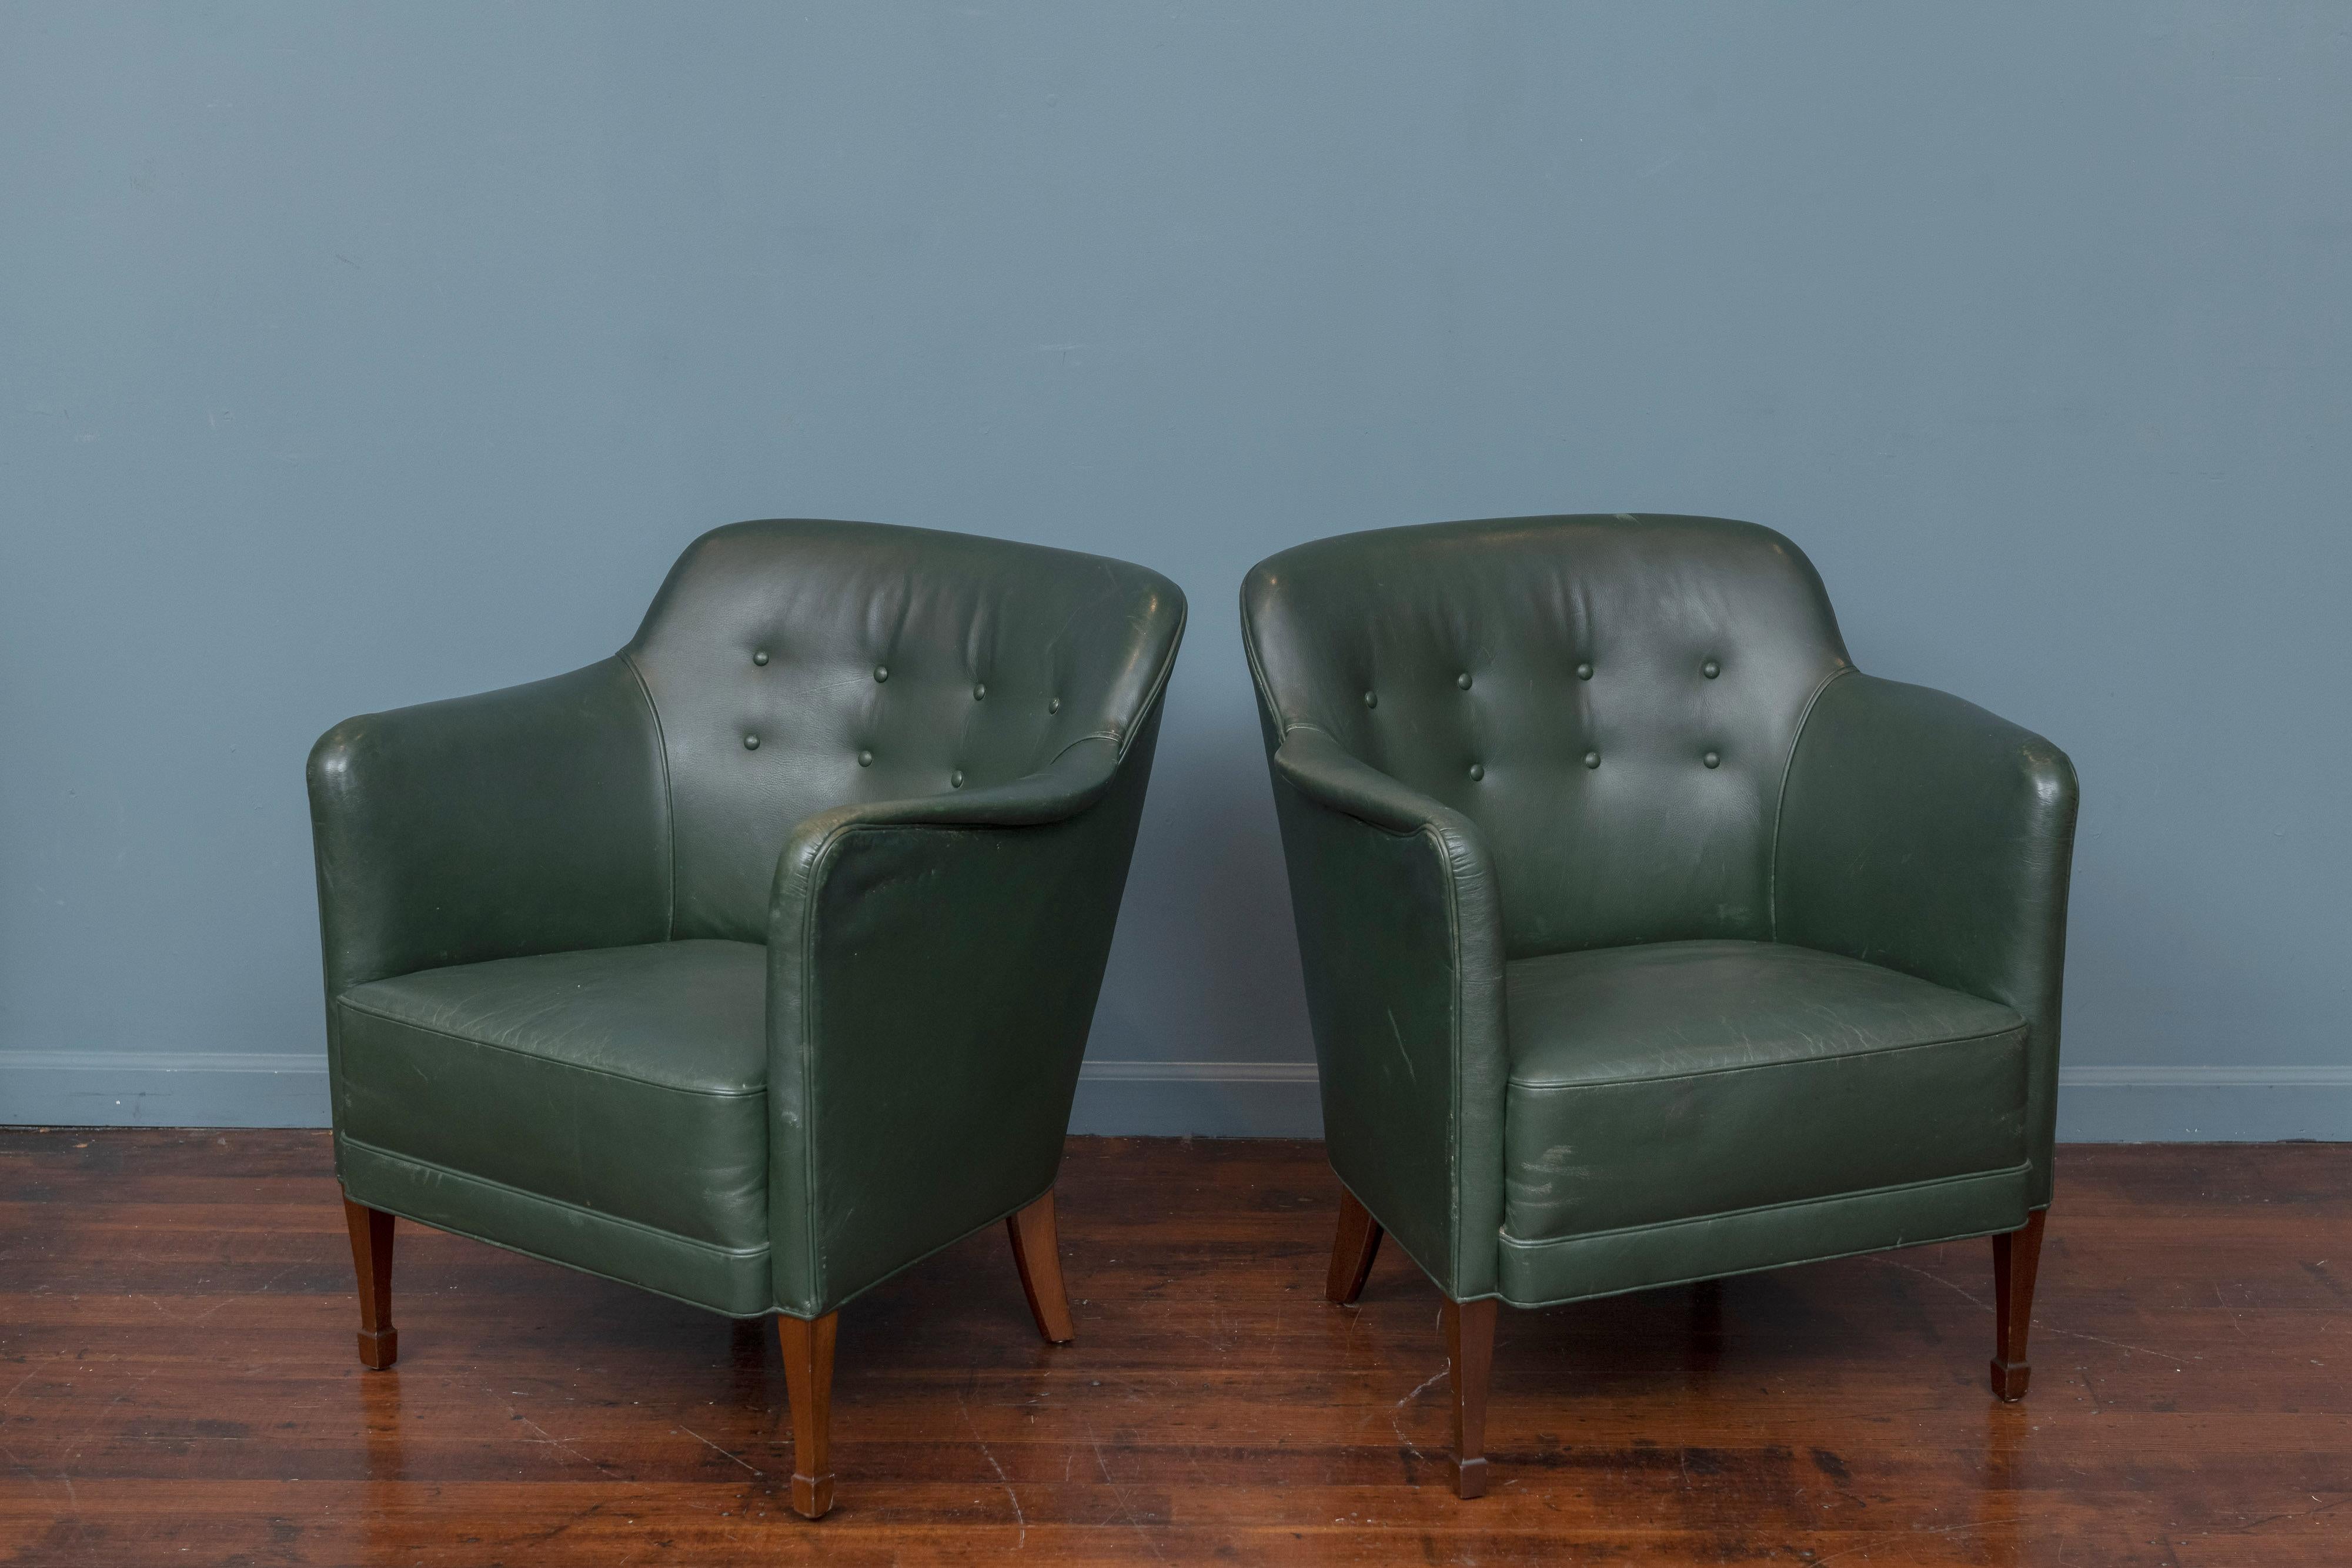 Frits Henningsen style lounge chairs executed in green button tufted leather on mahogany legs. Original leather upholstery is in good usable condition, ready to be installed.